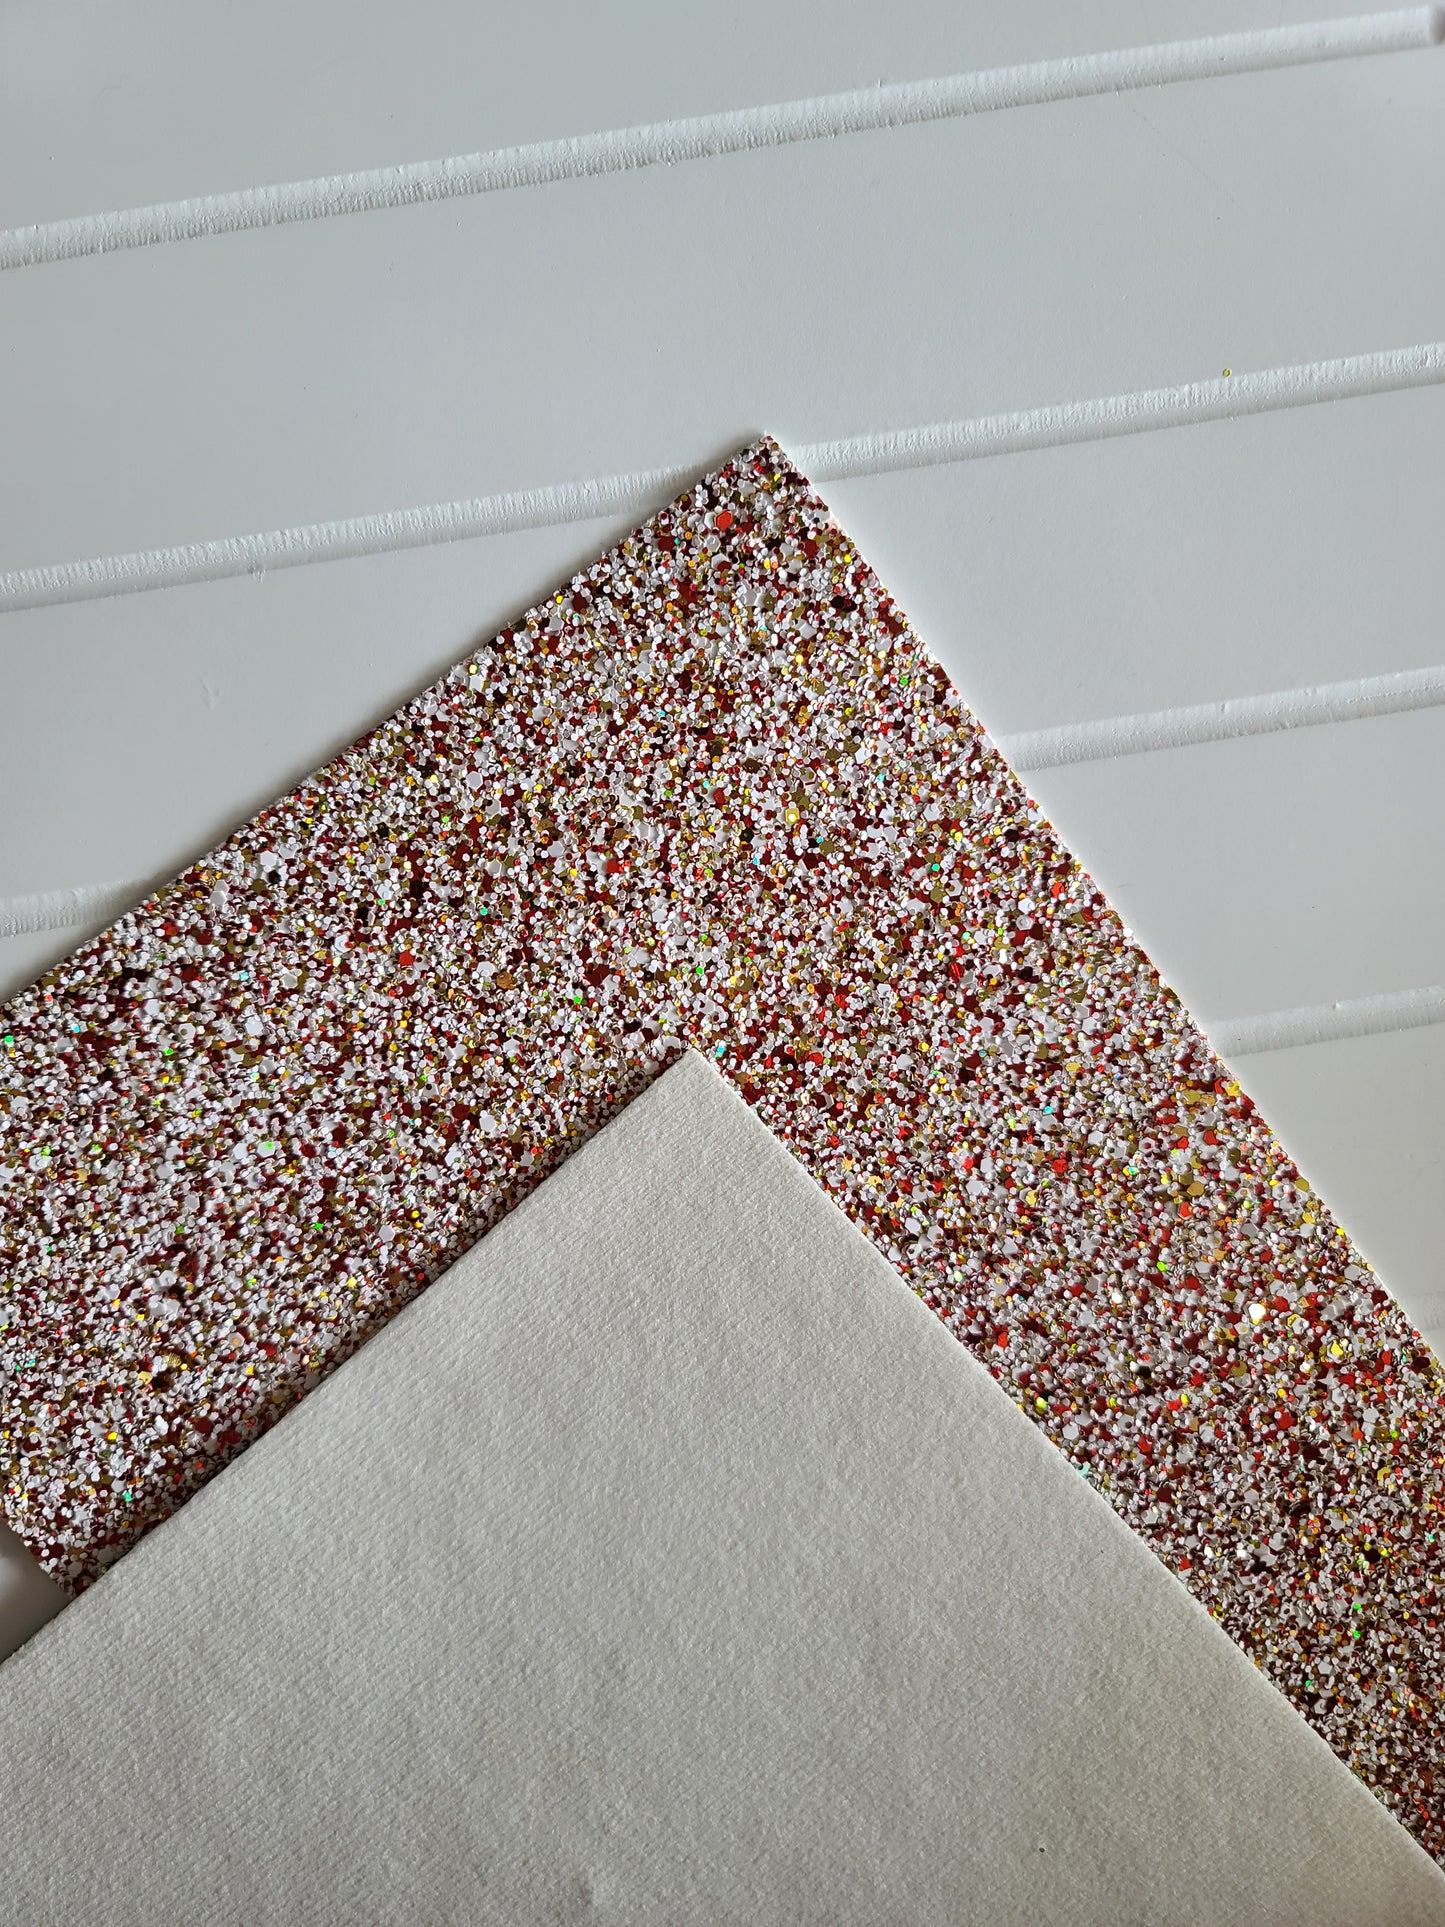 Red, White and Gold Chunky Glitter Fabric Sheet - cotton backing